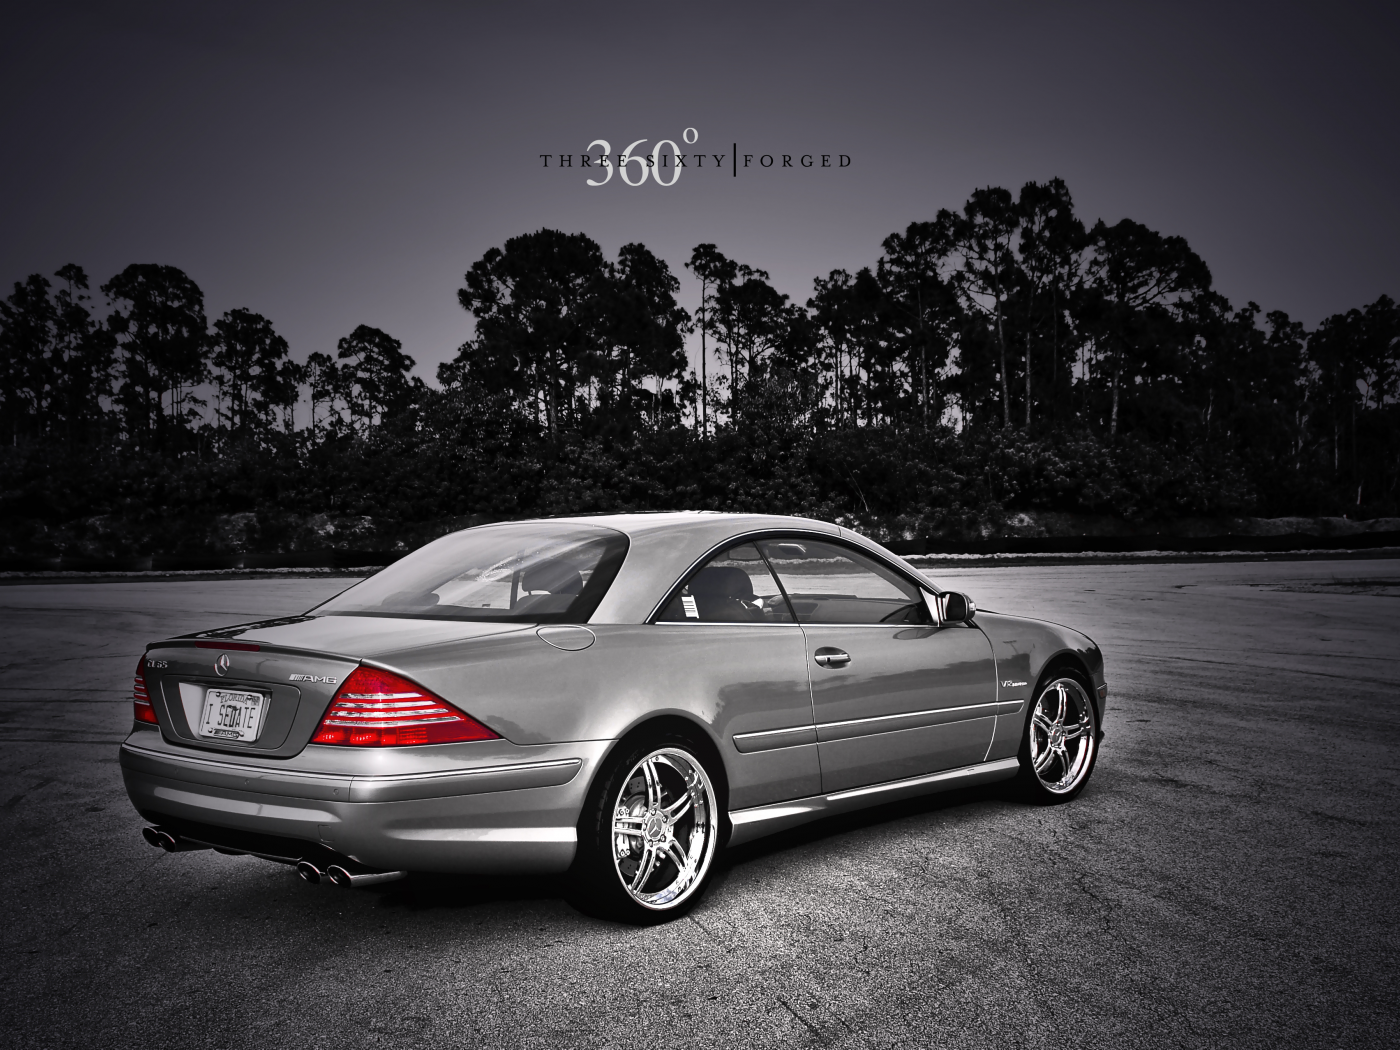 мерс купе, hd wallpapers, cl 65 обои, 360 forged, mercedes cl 65 amg